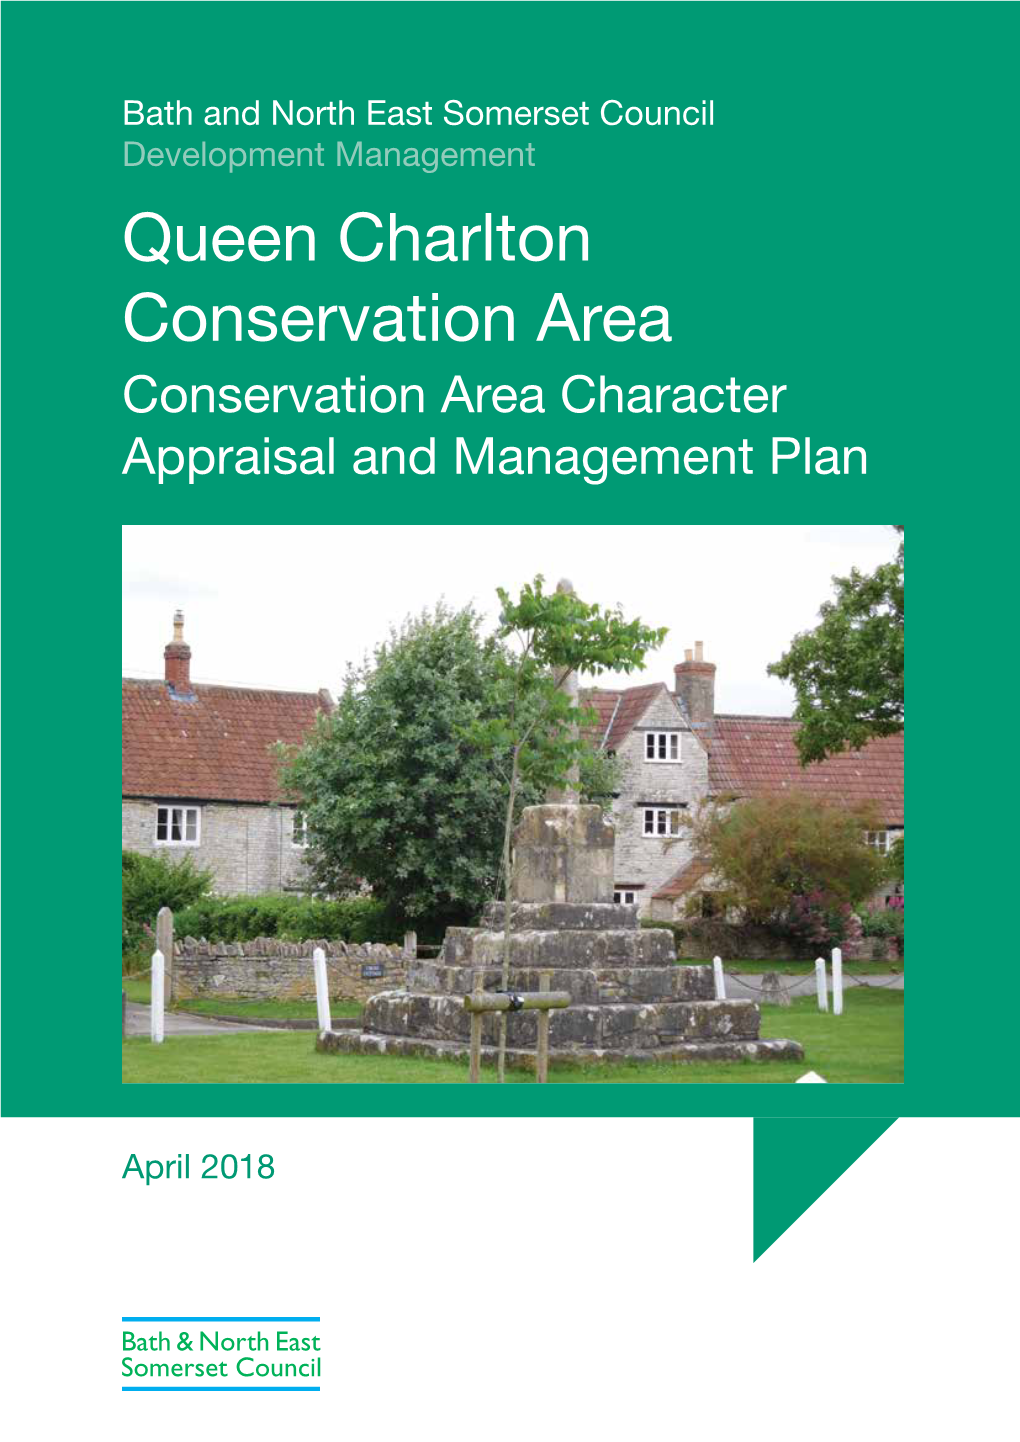 Queen Charlton Conservation Area Conservation Area Character Appraisal and Management Plan